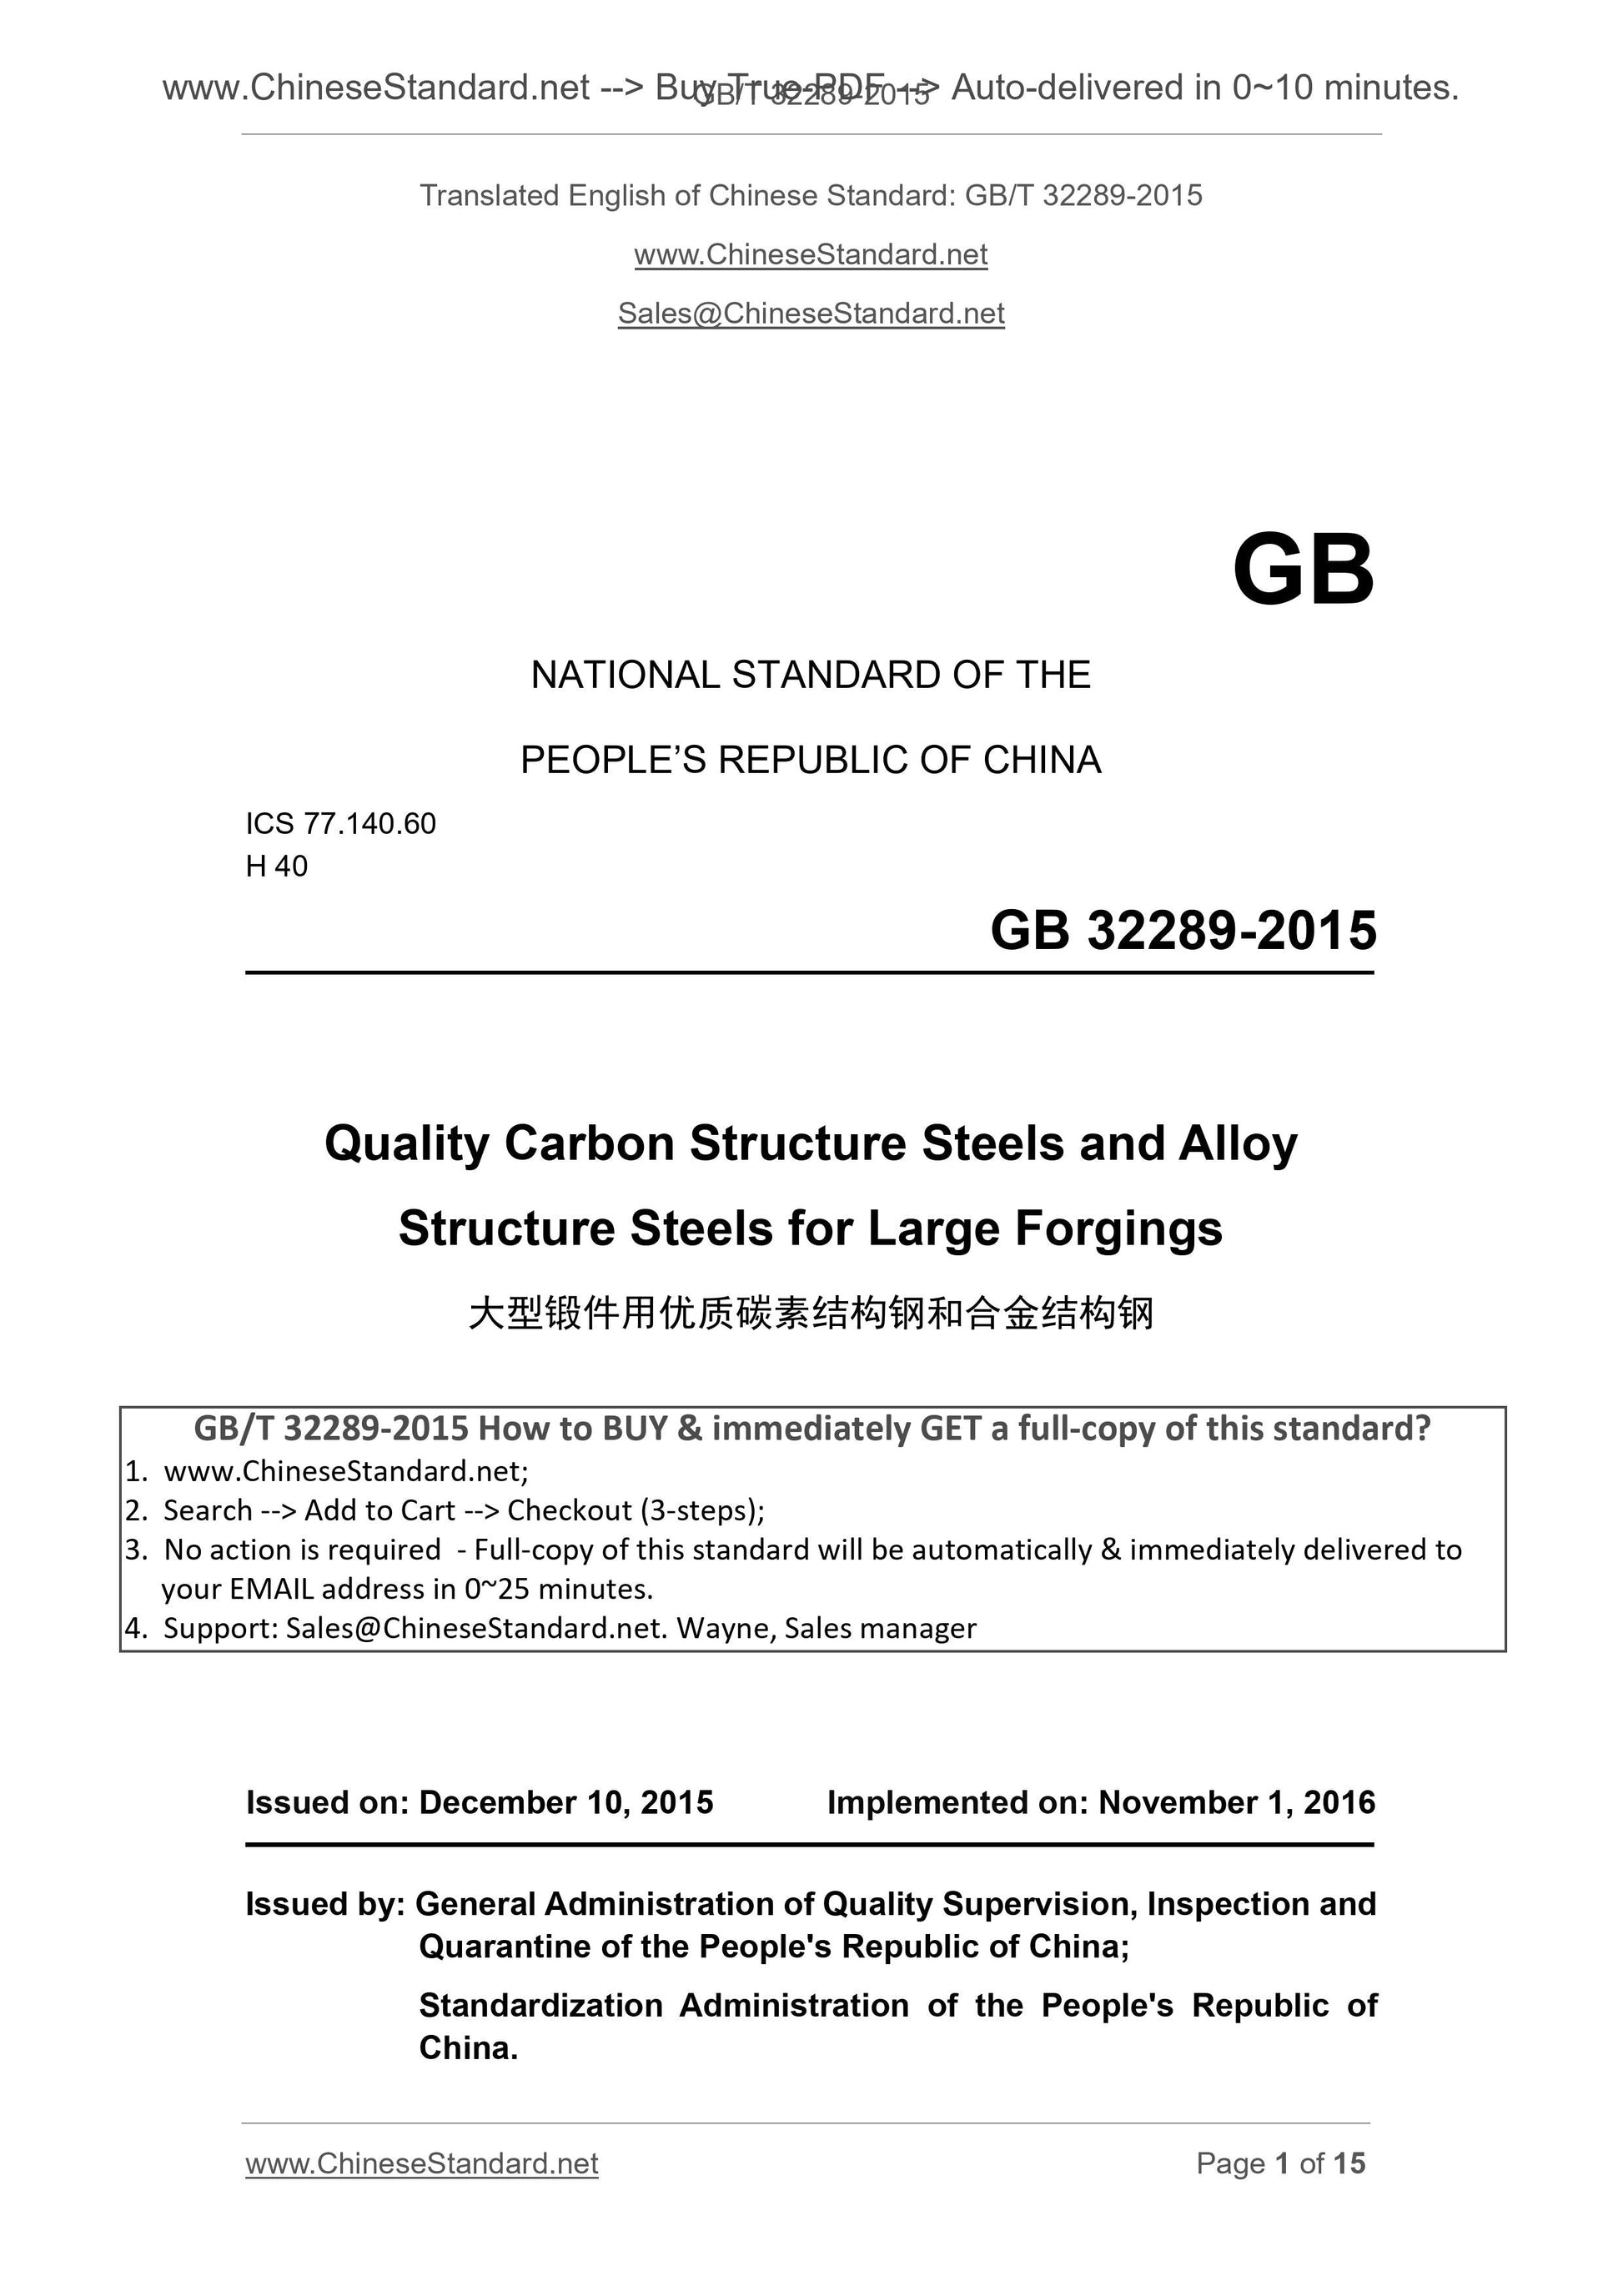 GB/T 32289-2015 Page 1